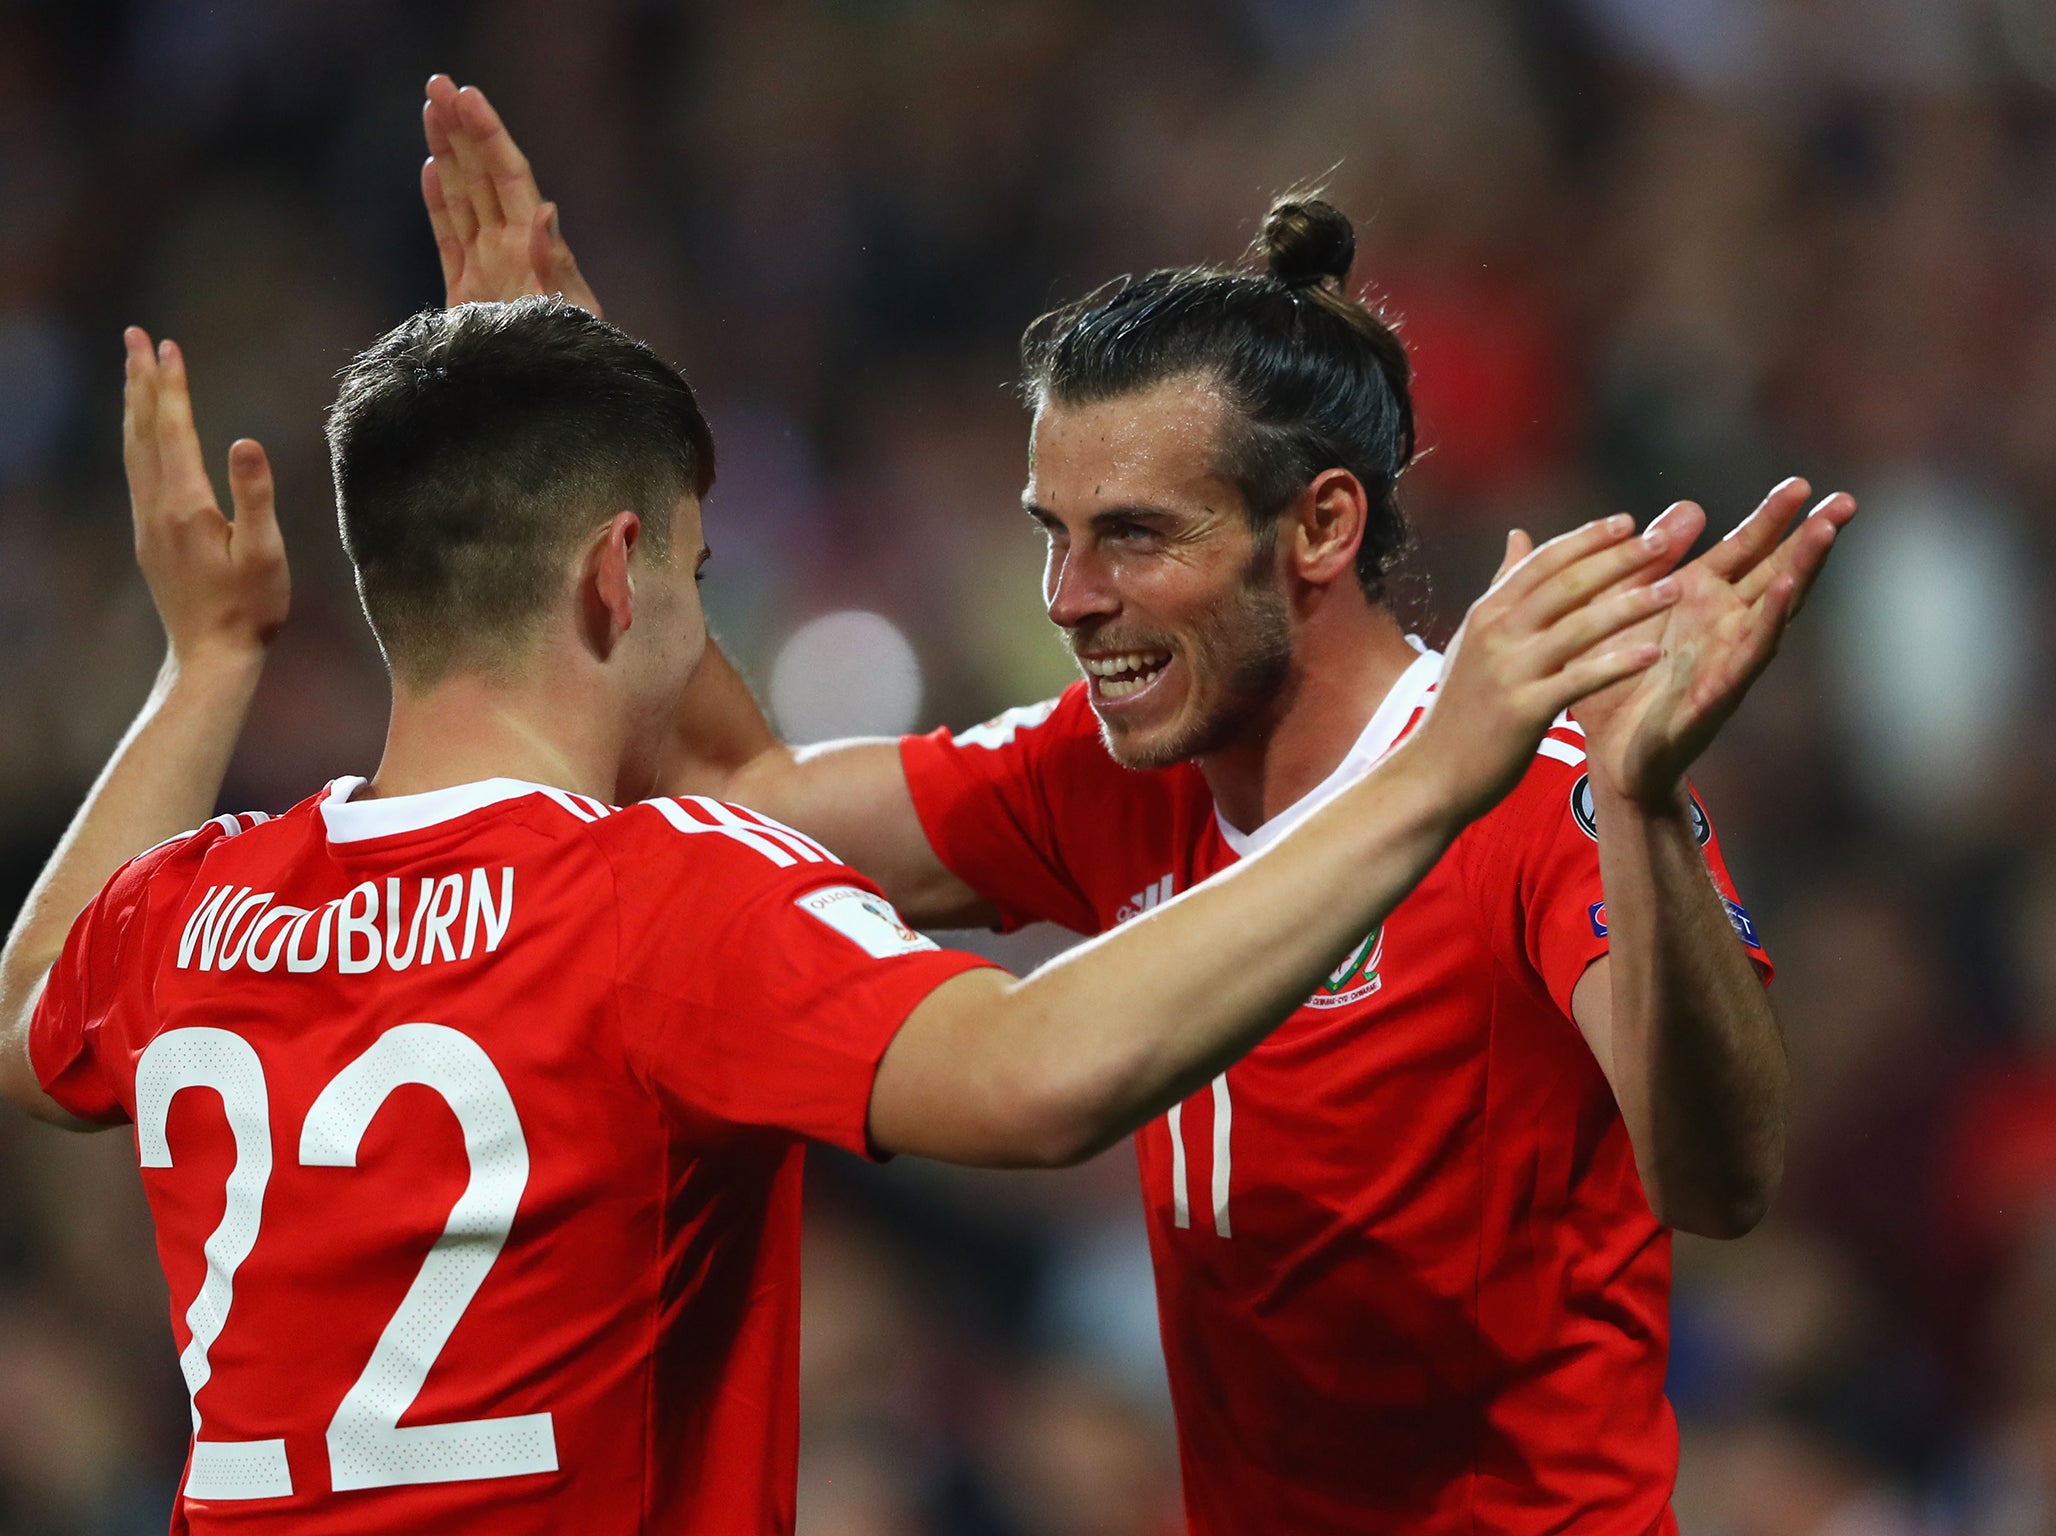 Wales will be without Gareth Bale for their crunch fixtures